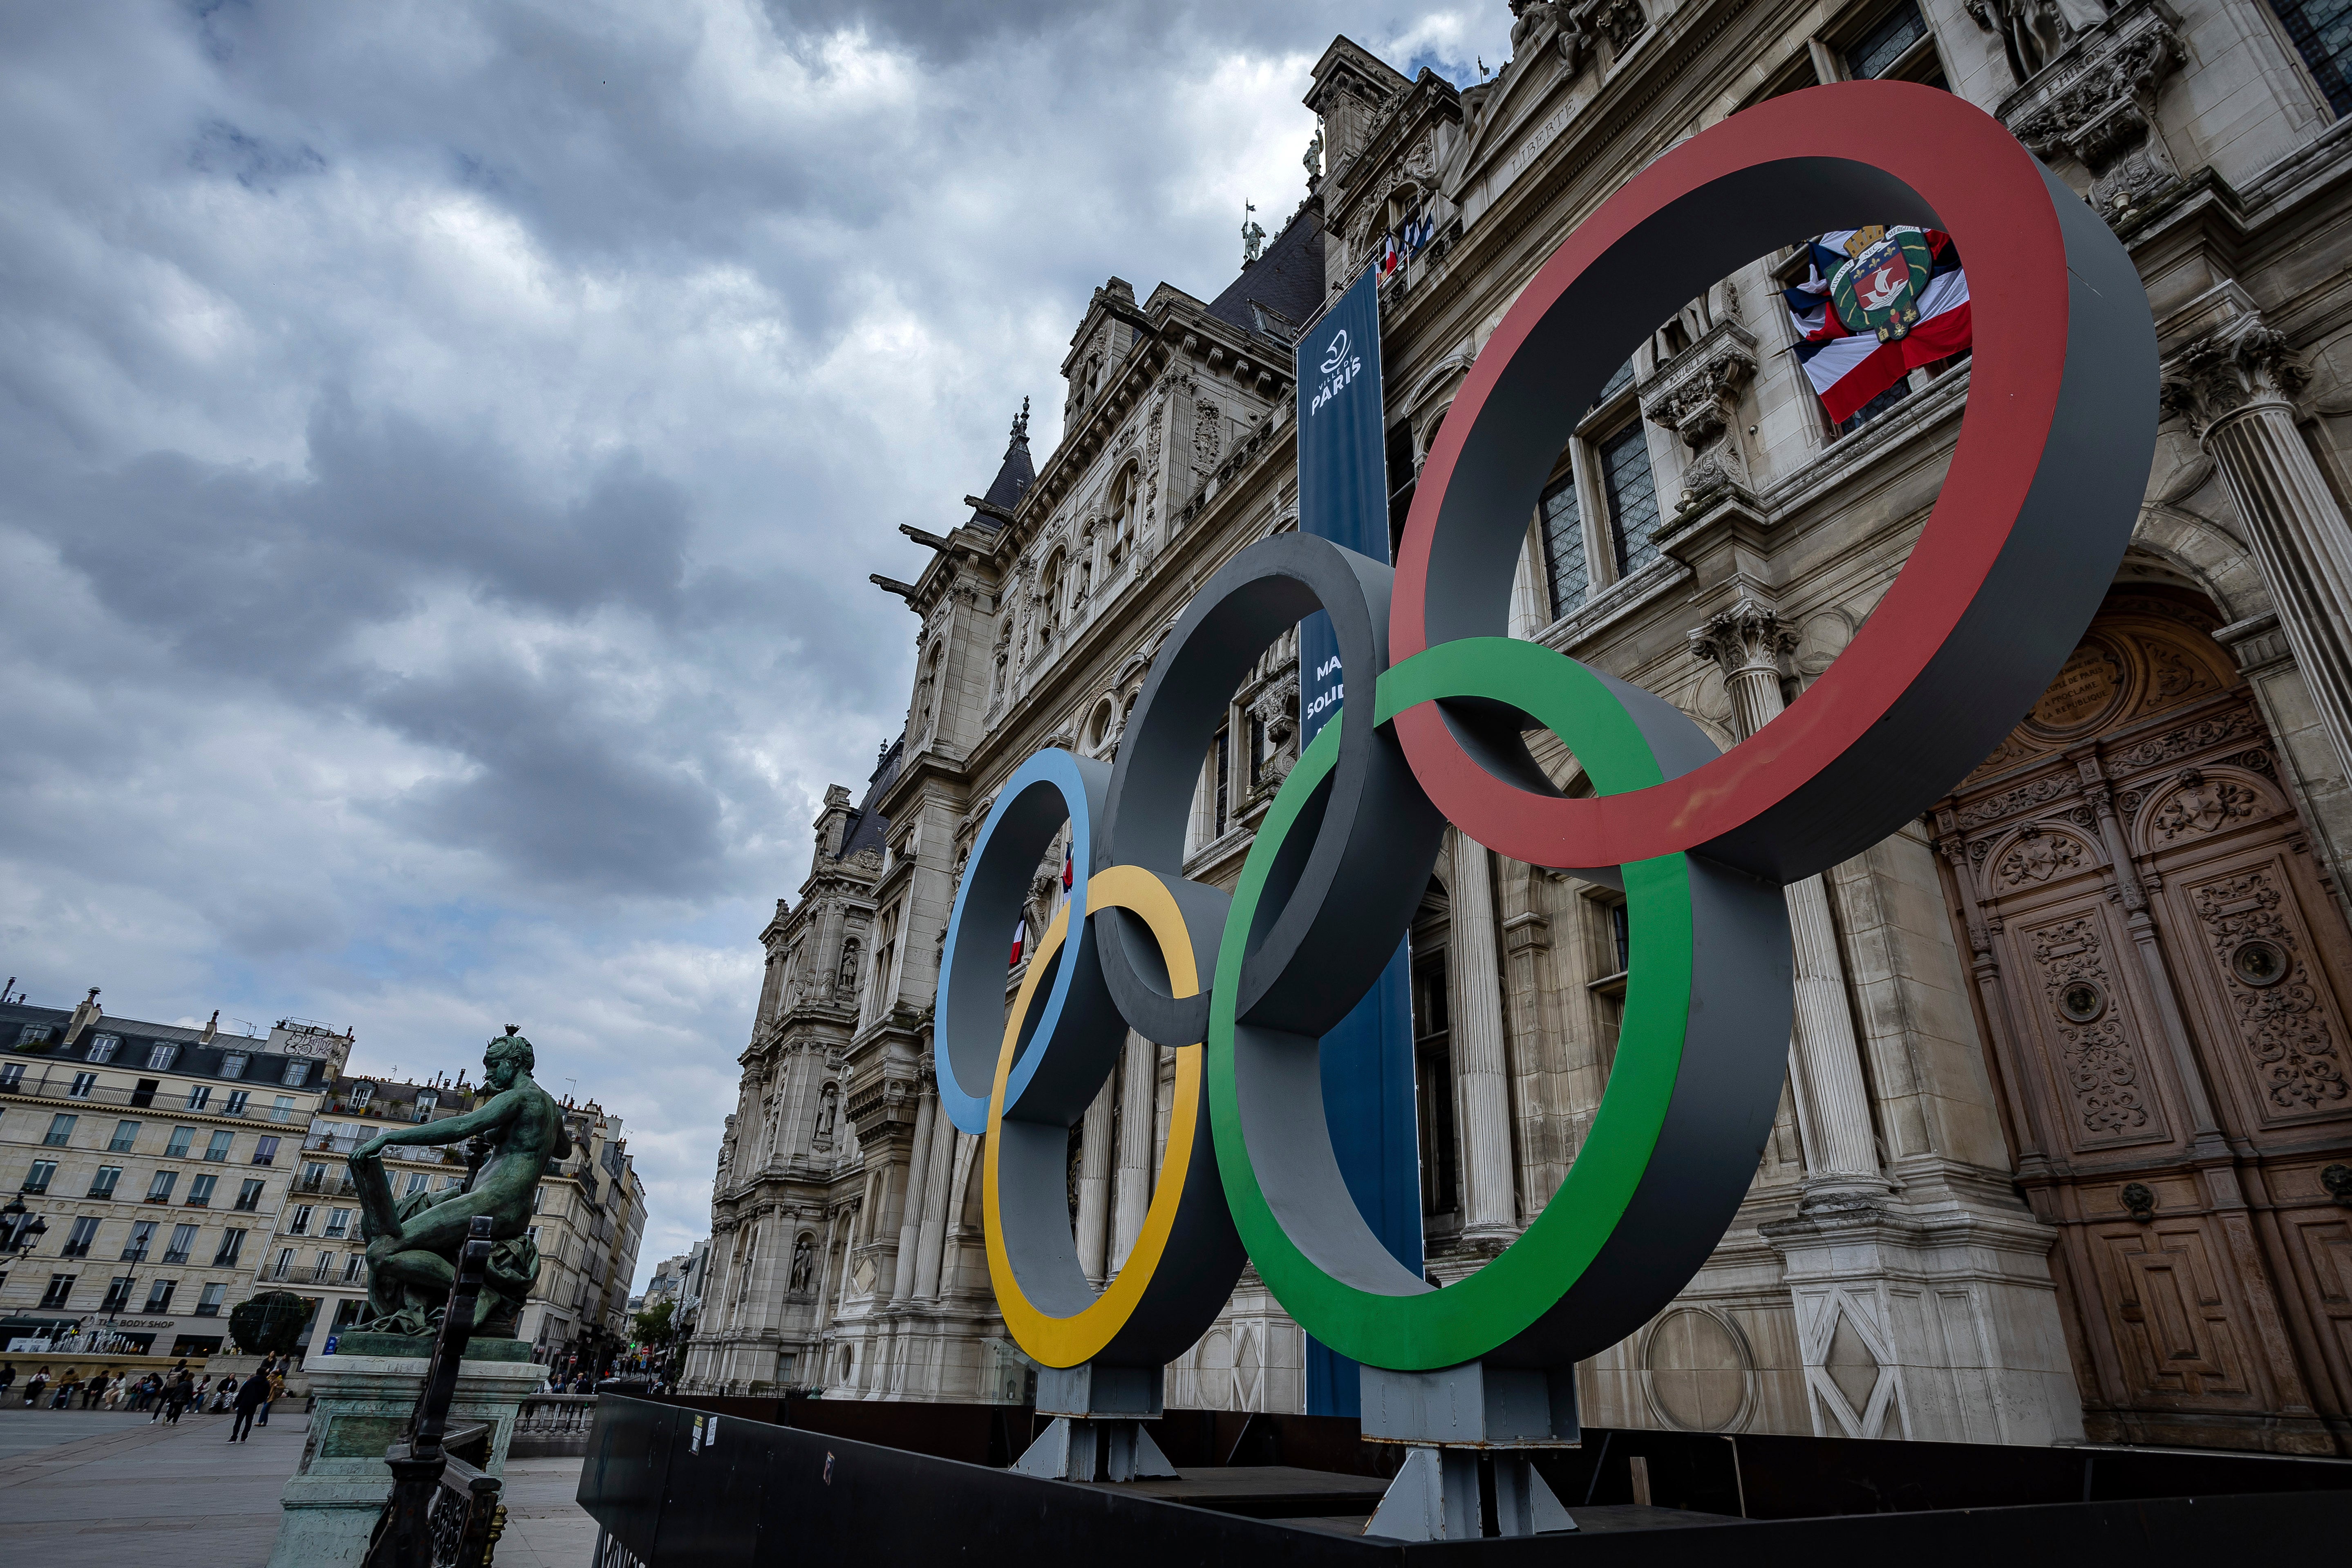 Paris is gearing up to host the world’s premier sporting event